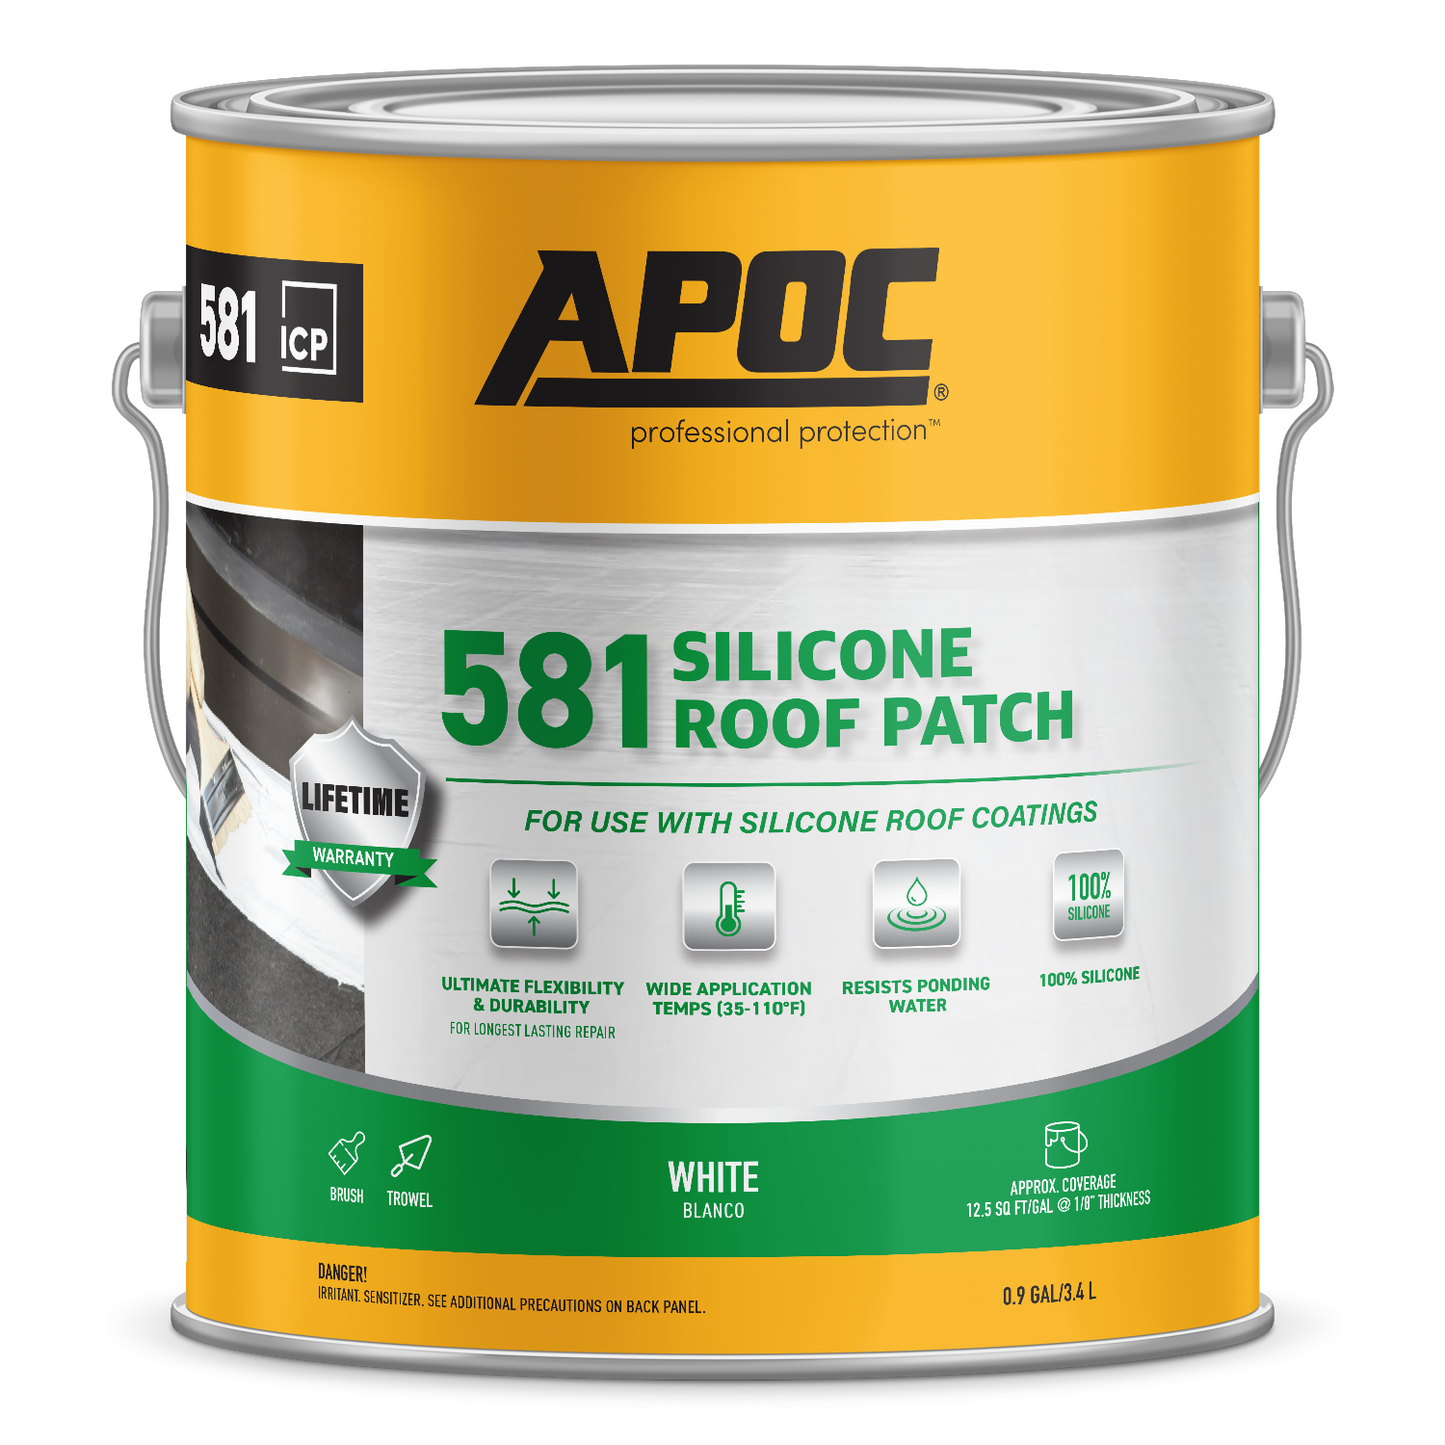 APOC<sup>®</sup>581<br>Silicone Roof Patch